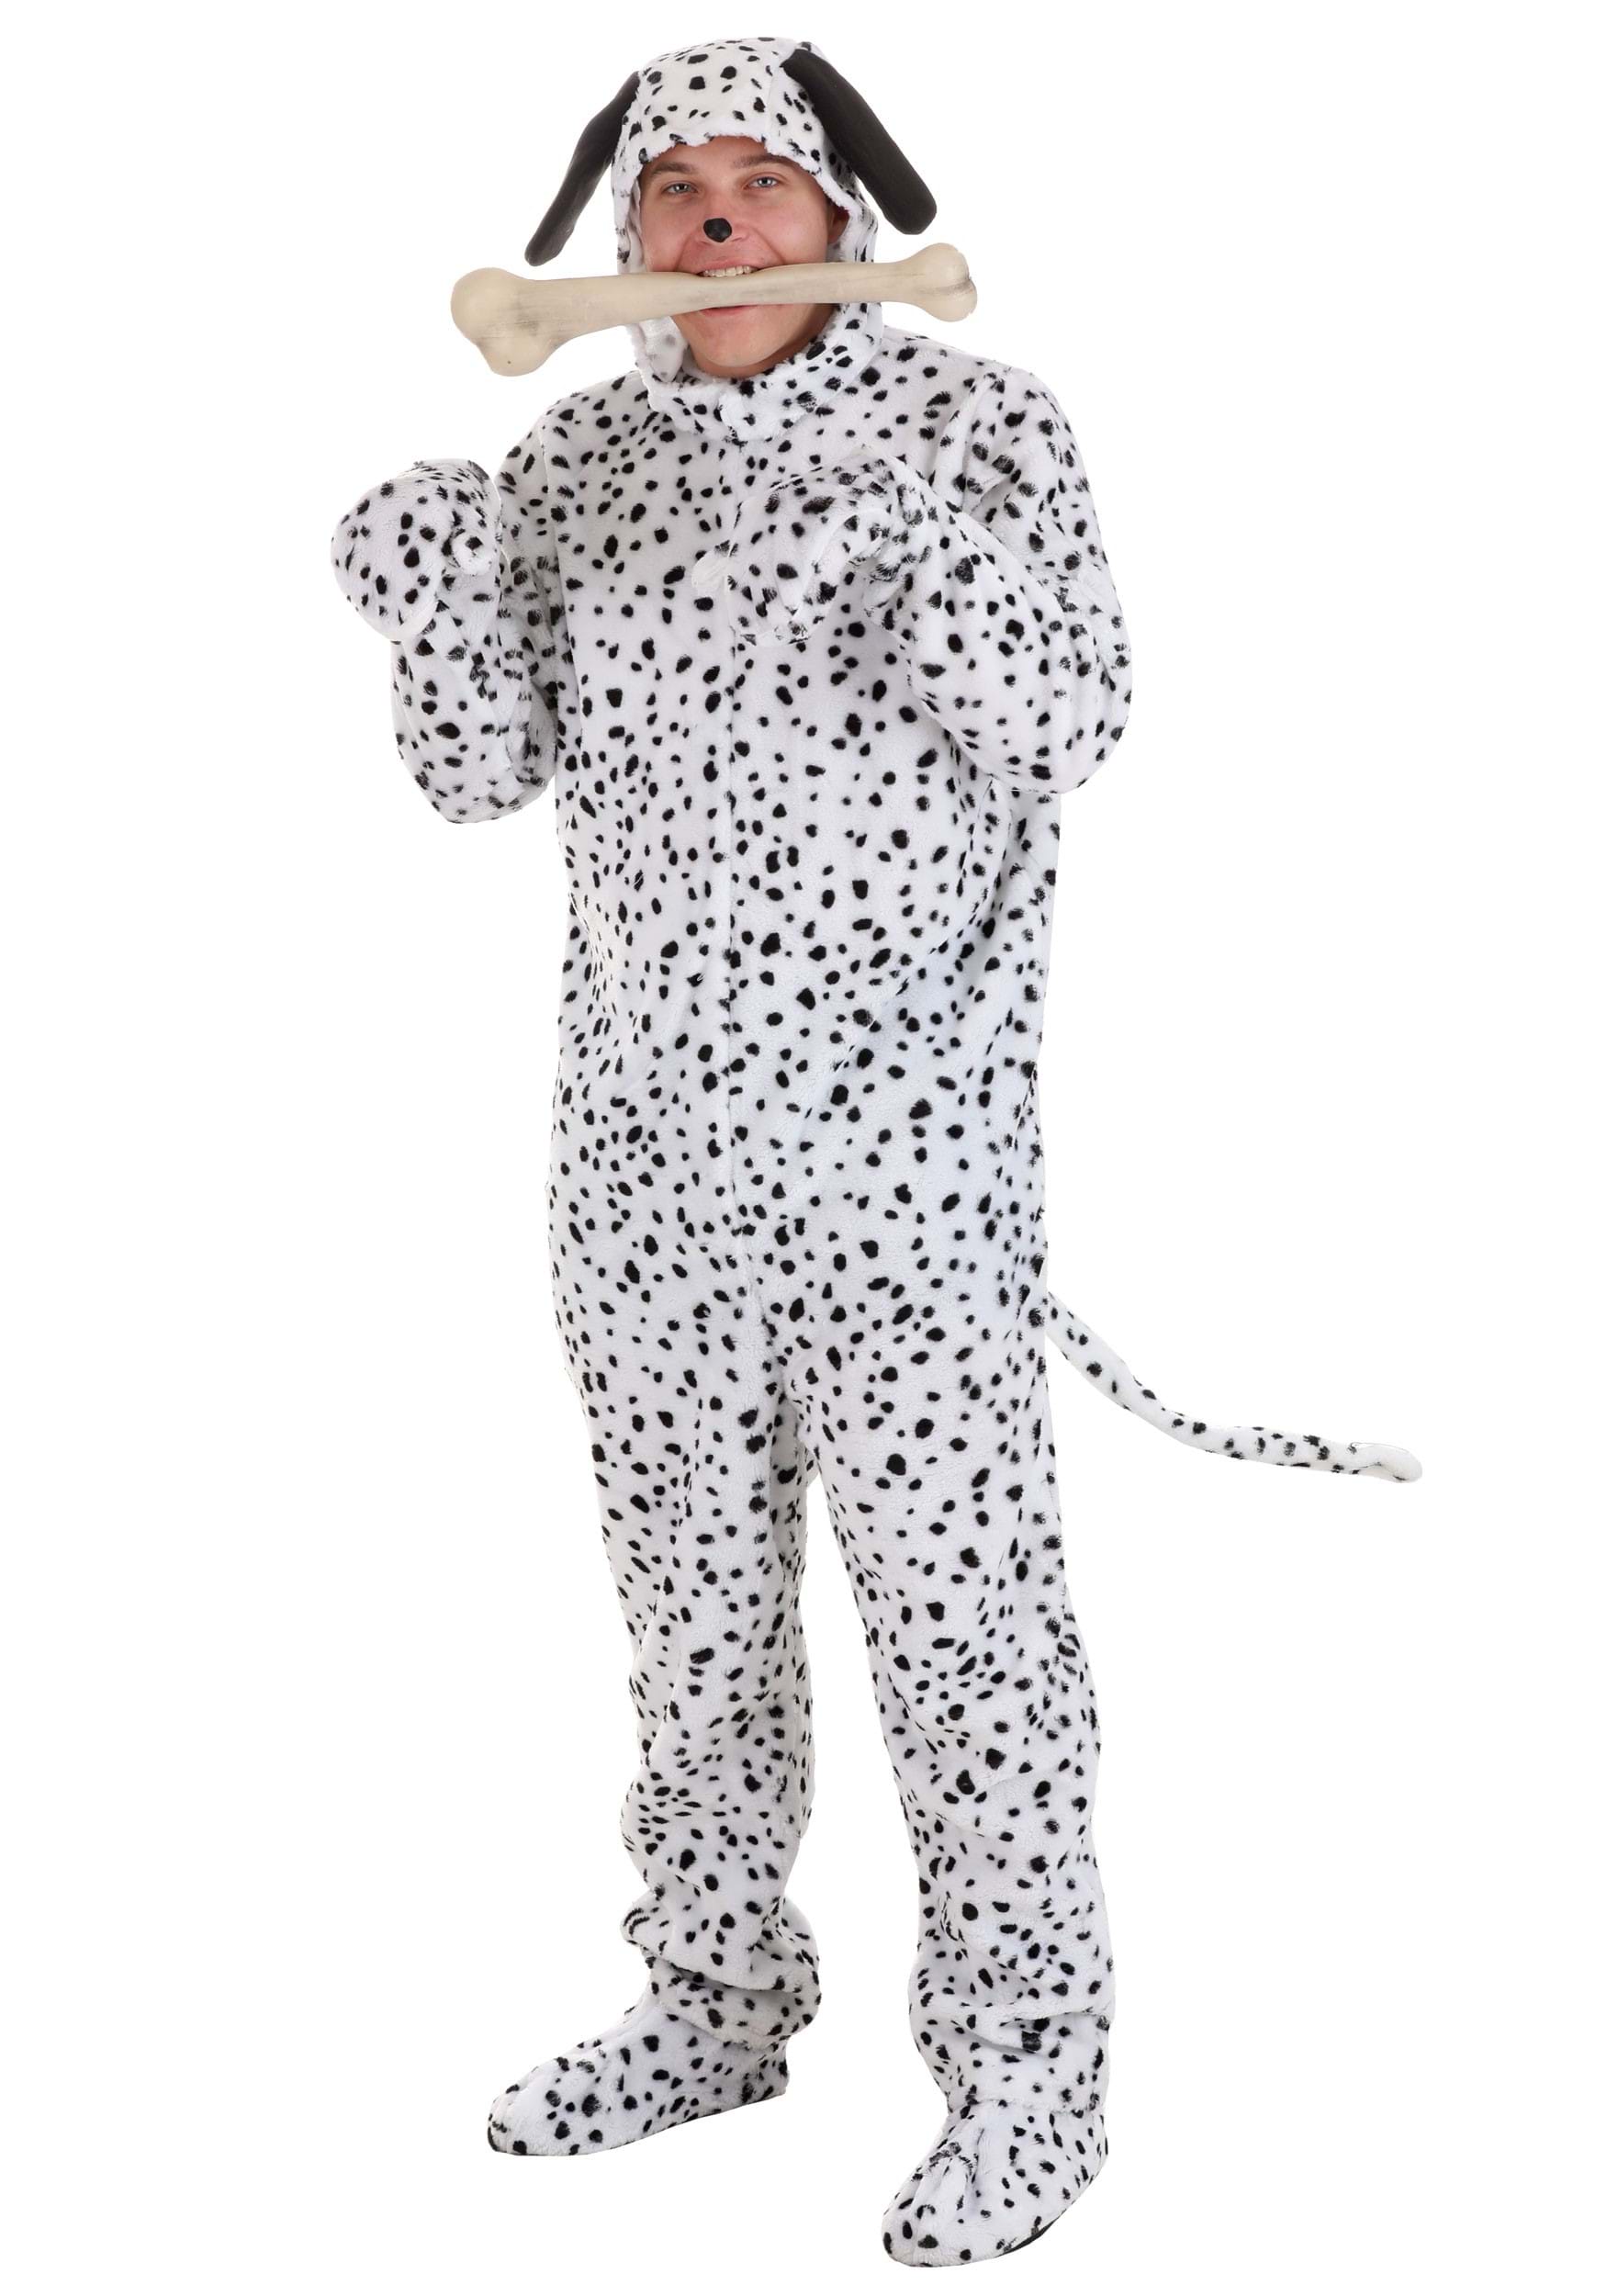 Dalmatian Dog Costume For Adults , Animal Costumes